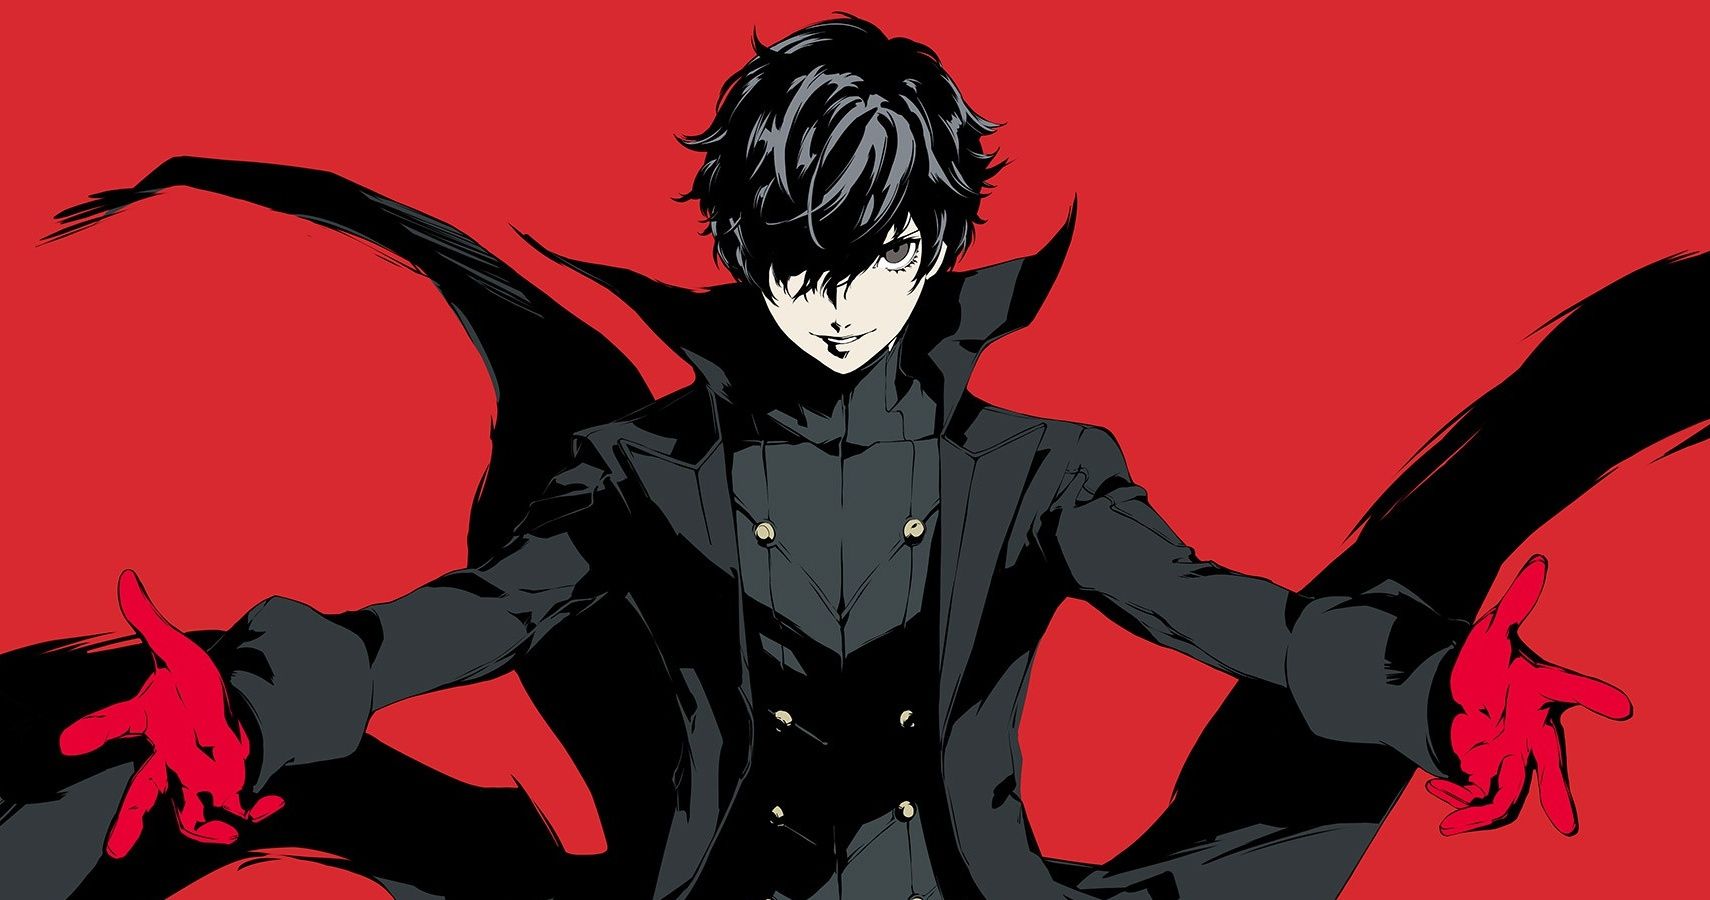 Persona 5 5 Video Game Villains Joker Can Beat 5 He Can T Flipboard - somebody on roblox tried to be joker from persona 5 but i